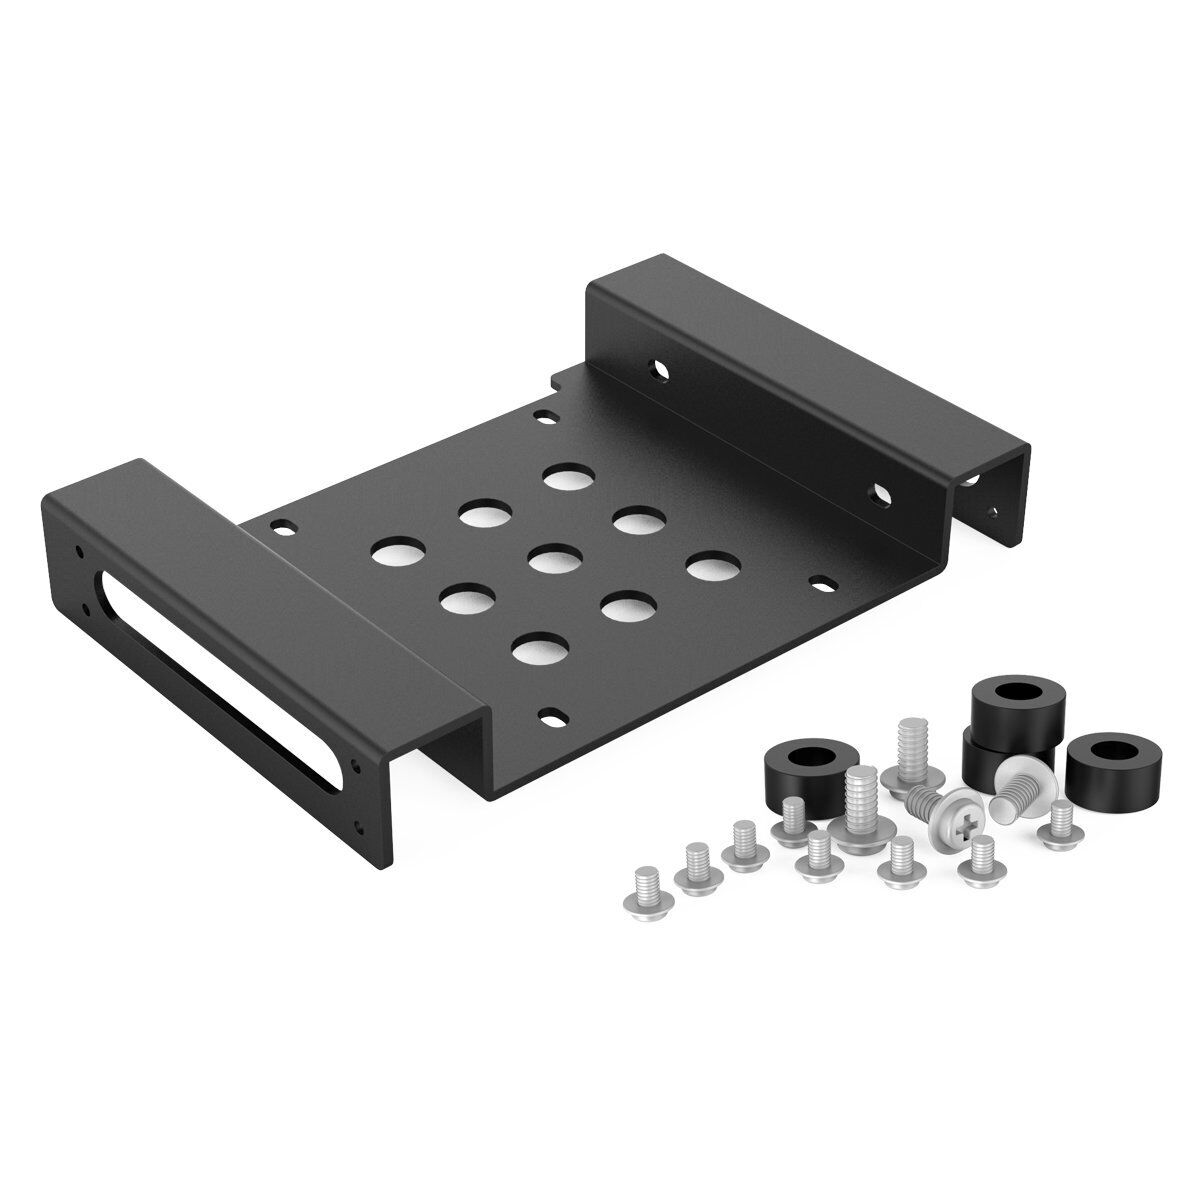 Aluminum 5.25 Inch to 2.5 or 3.5 Inch Internal Hard Disk Drive Mounting Kit w...